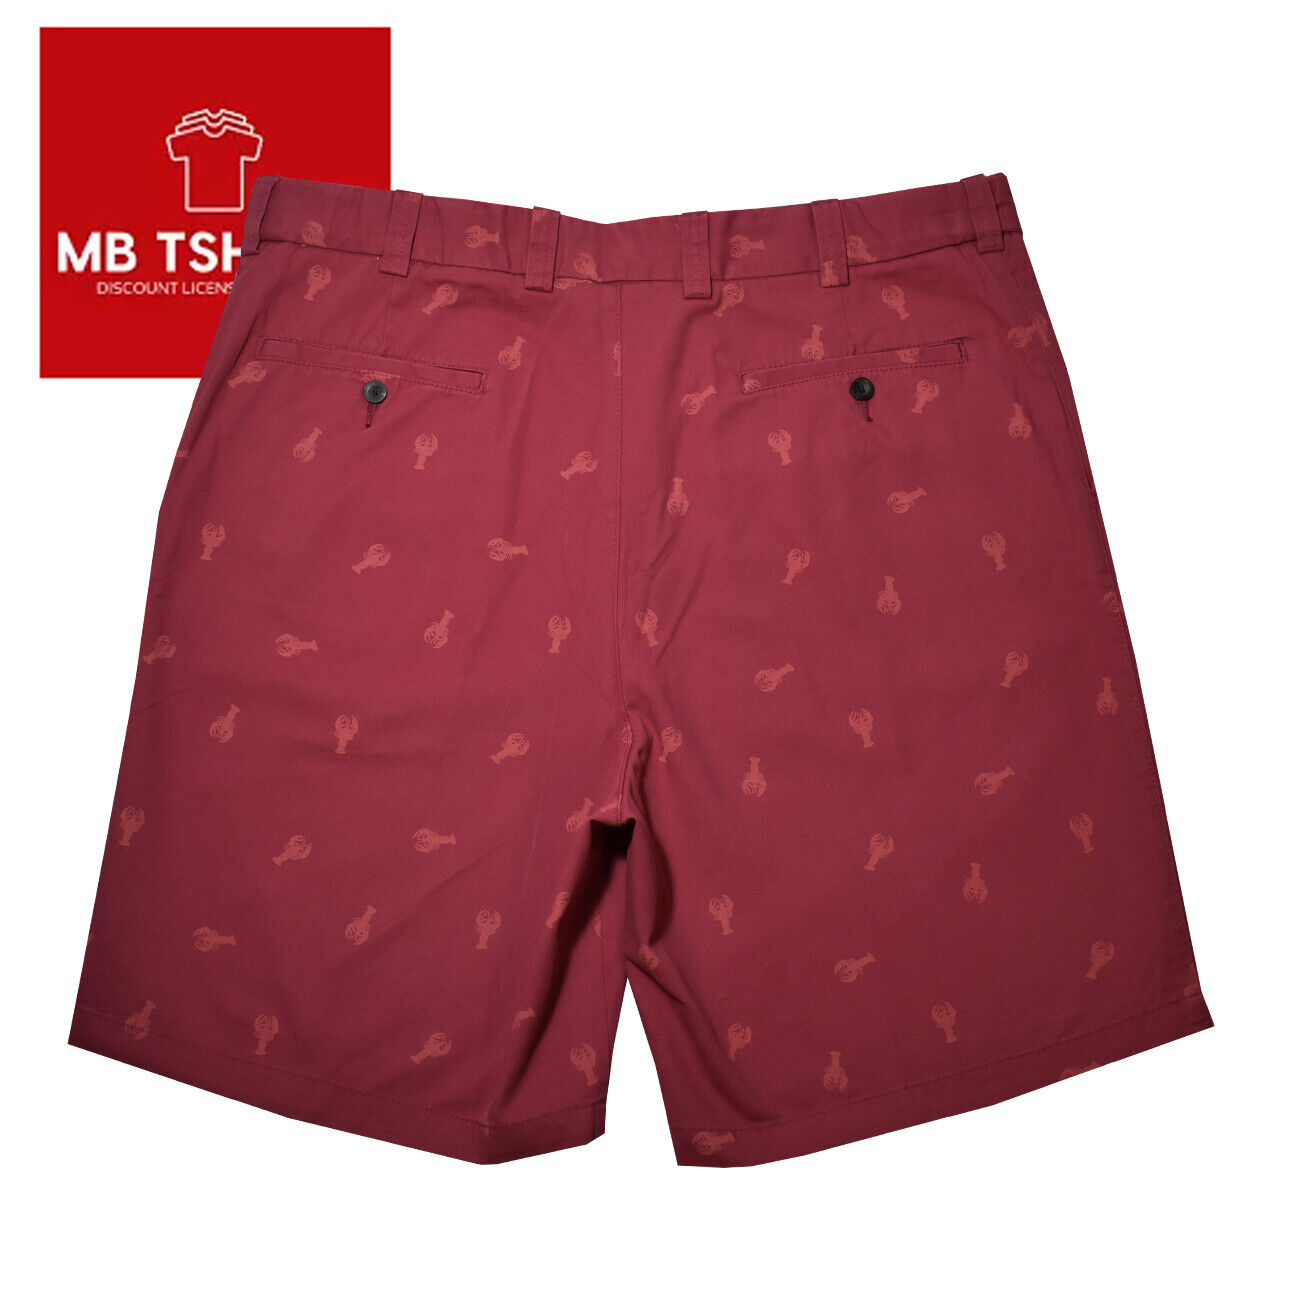 Casual Outdoor Shorts - Men's Big and Tall Fit - Red Lobster Print